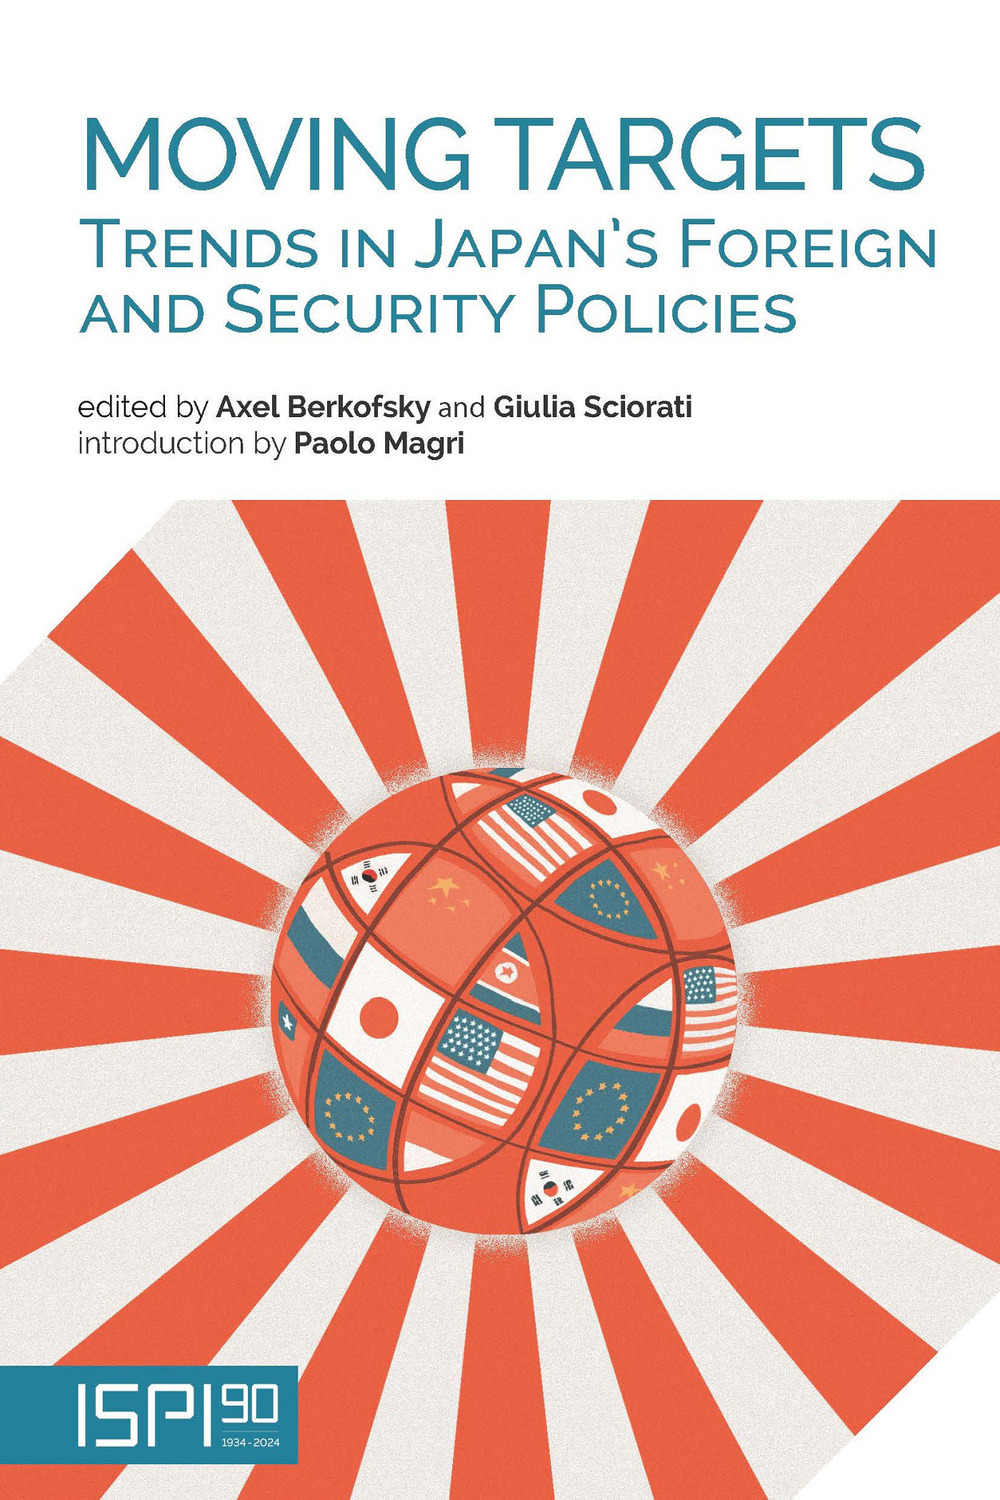 Moving targets. Trends in Japan's foreign and security policies